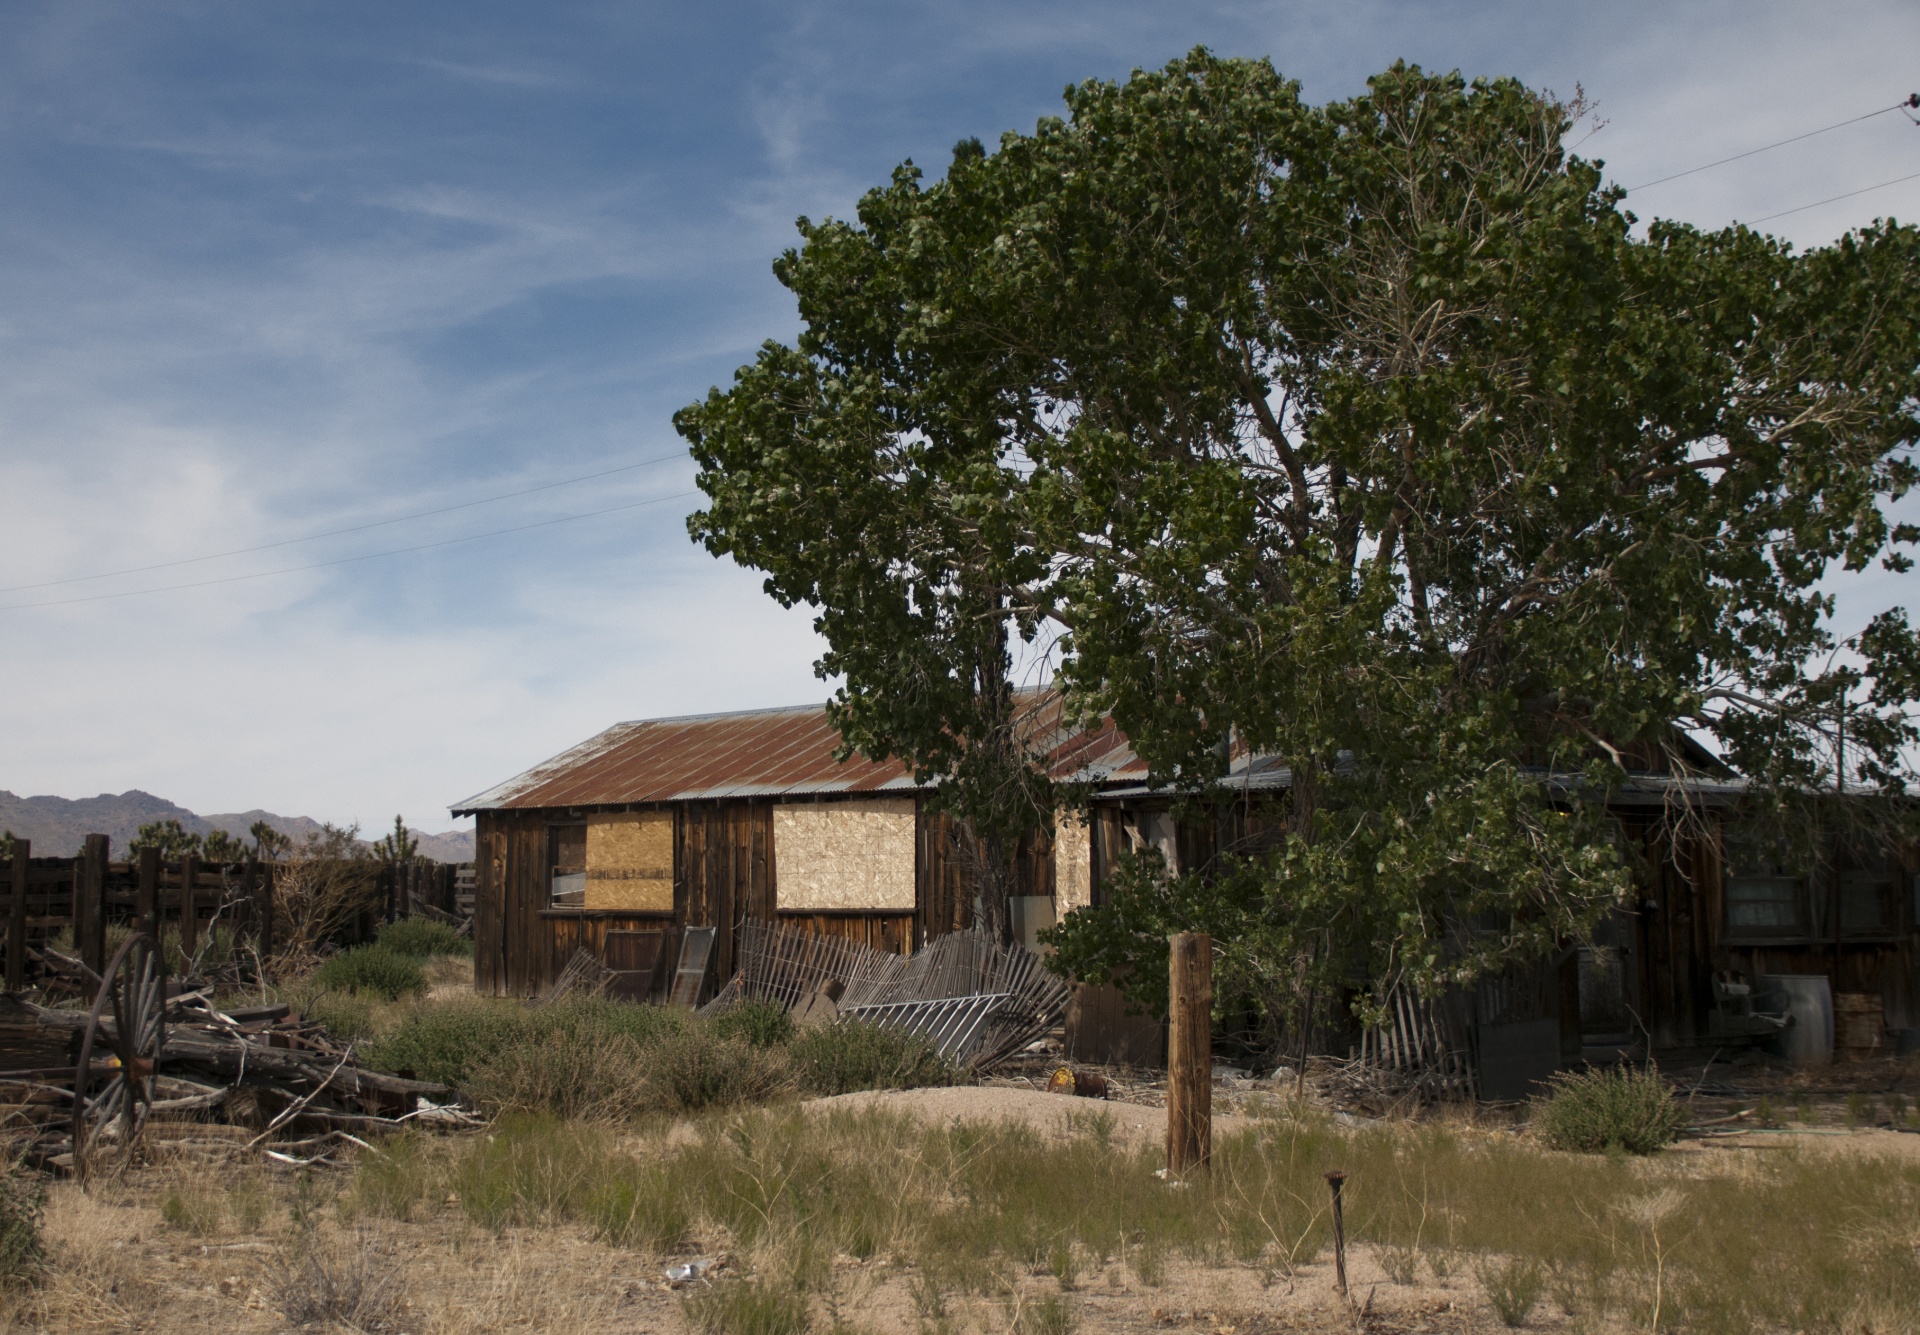 shack in the deseret next to a shady tree